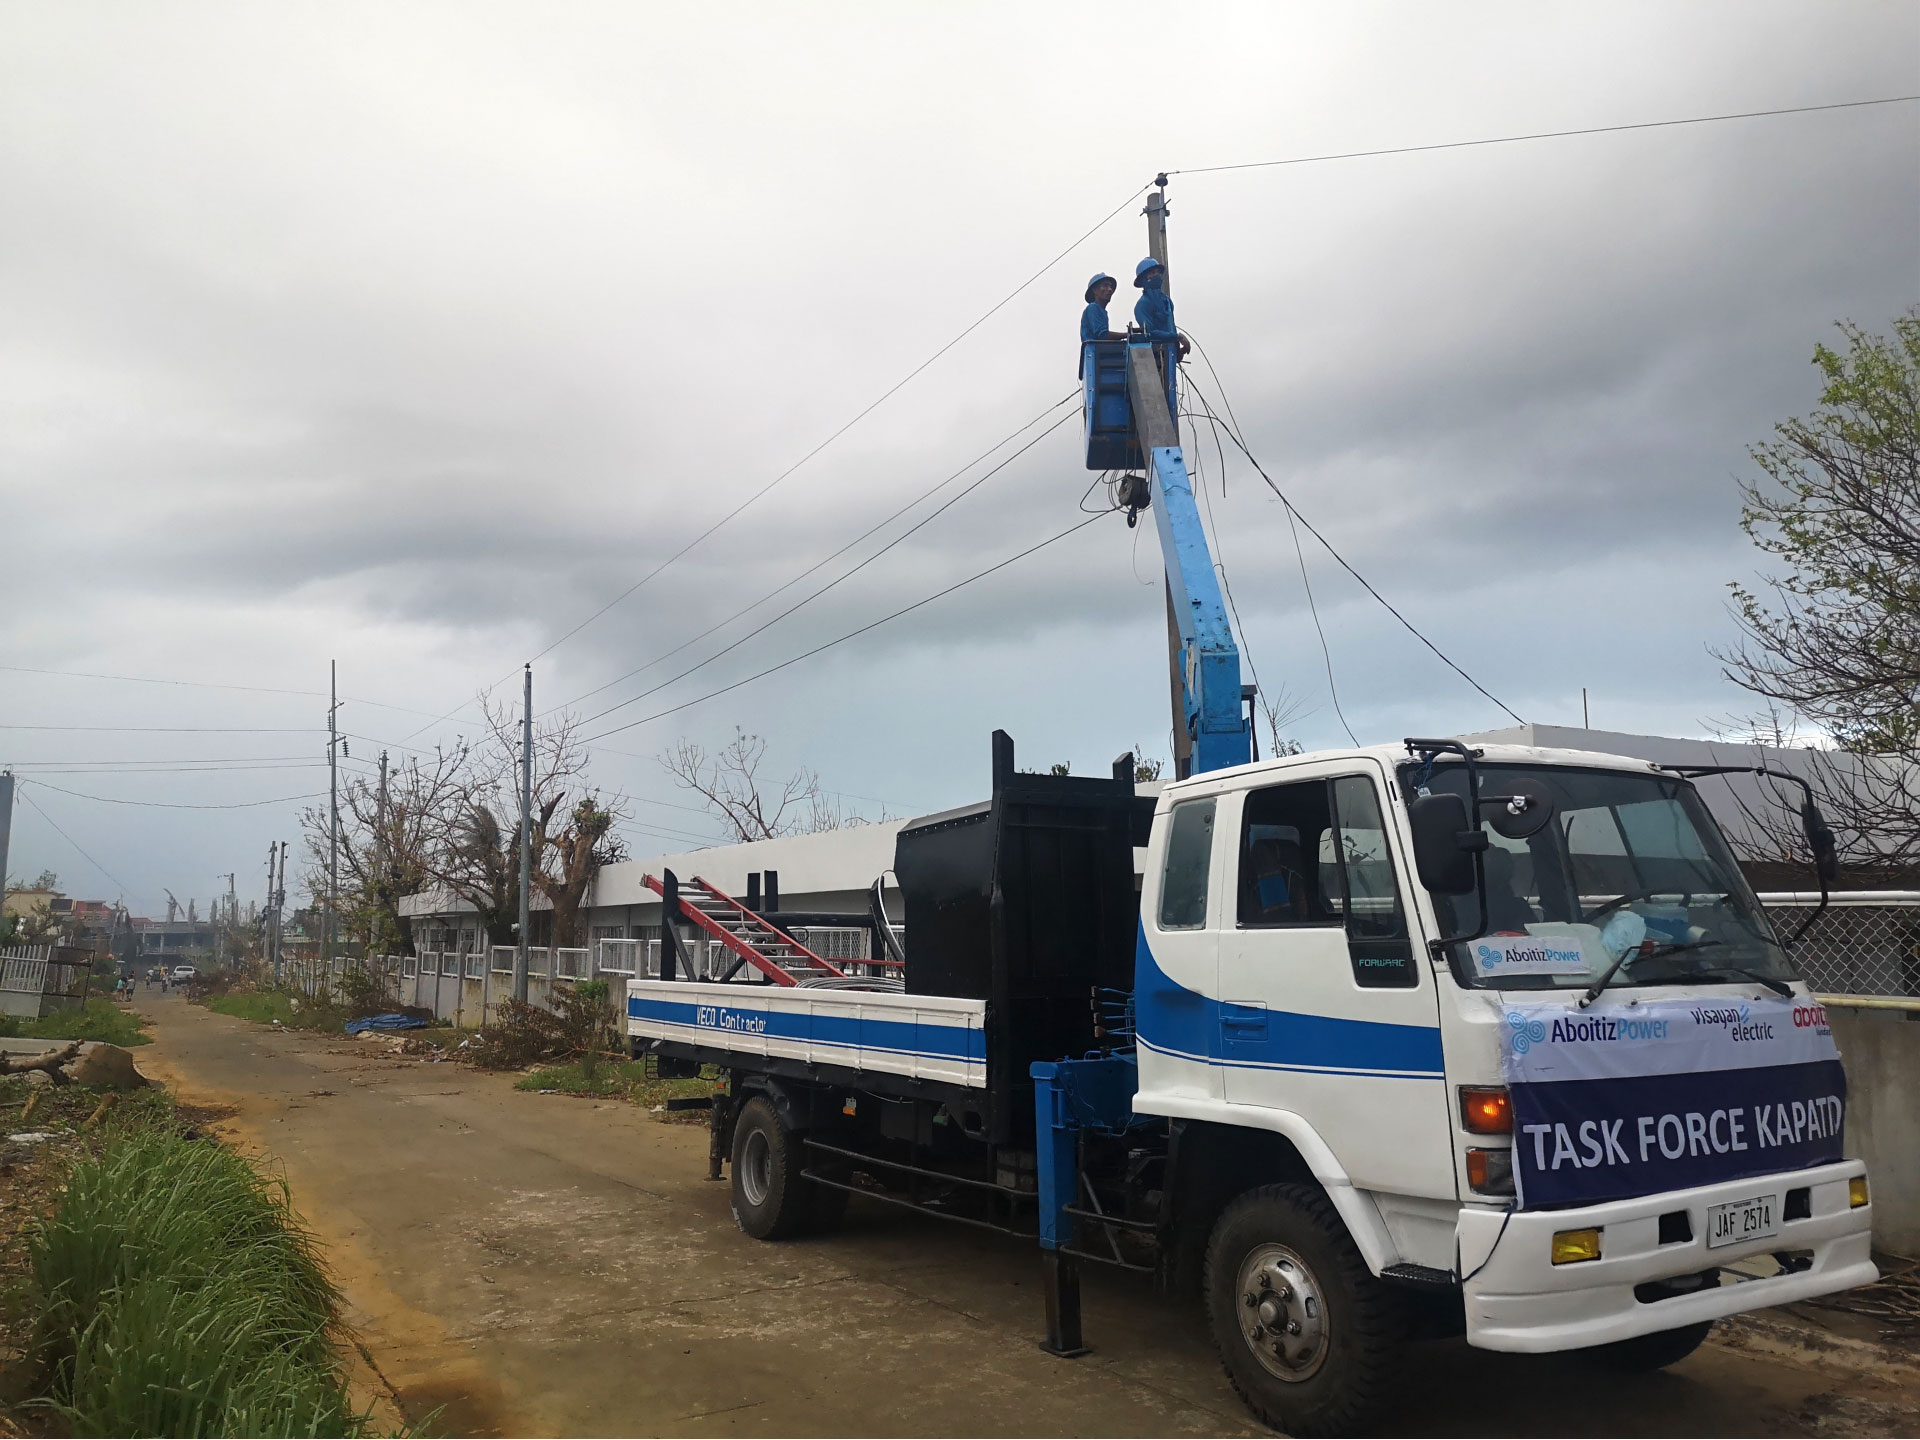 Linemen from the Visayan Electric Co. conduct line stringing works on one of the affected electric poles in Tiwi, Albay on Saturday, Nov. 14, 2020.